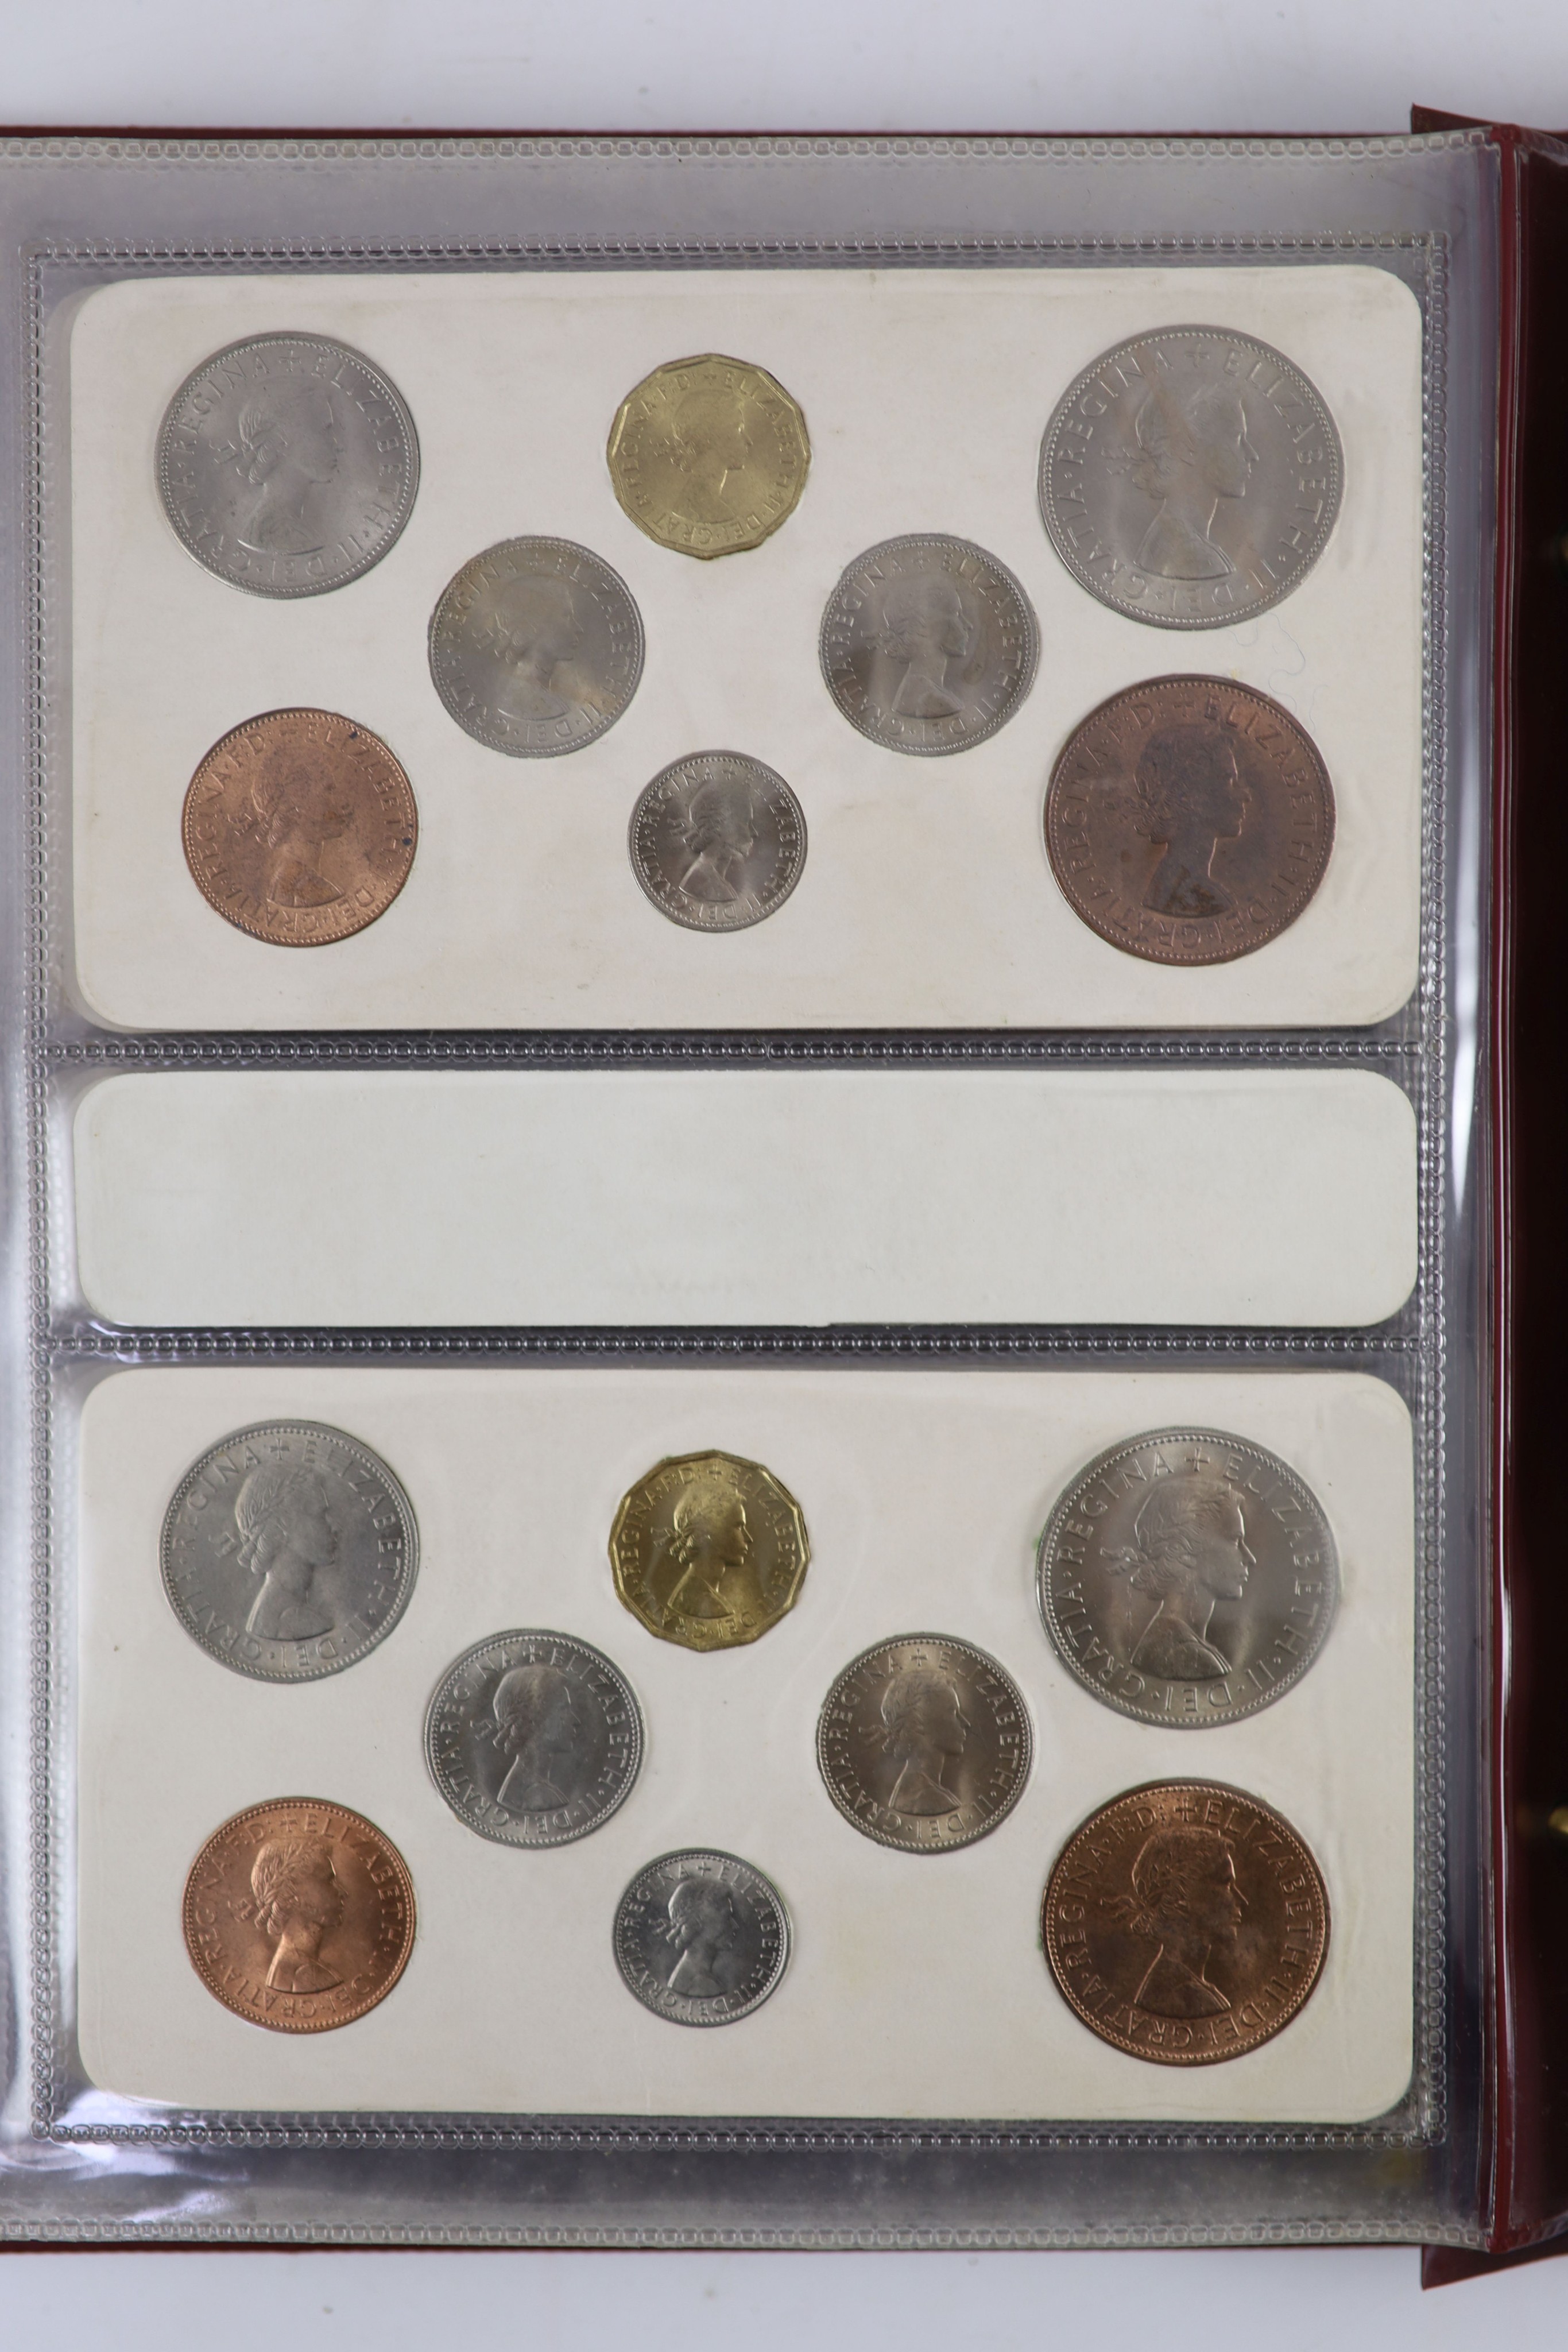 Queen Elizabeth II pre-decimal specimen coin sets for 1953 - 1967, first and second issues, all EF/ - Image 19 of 34